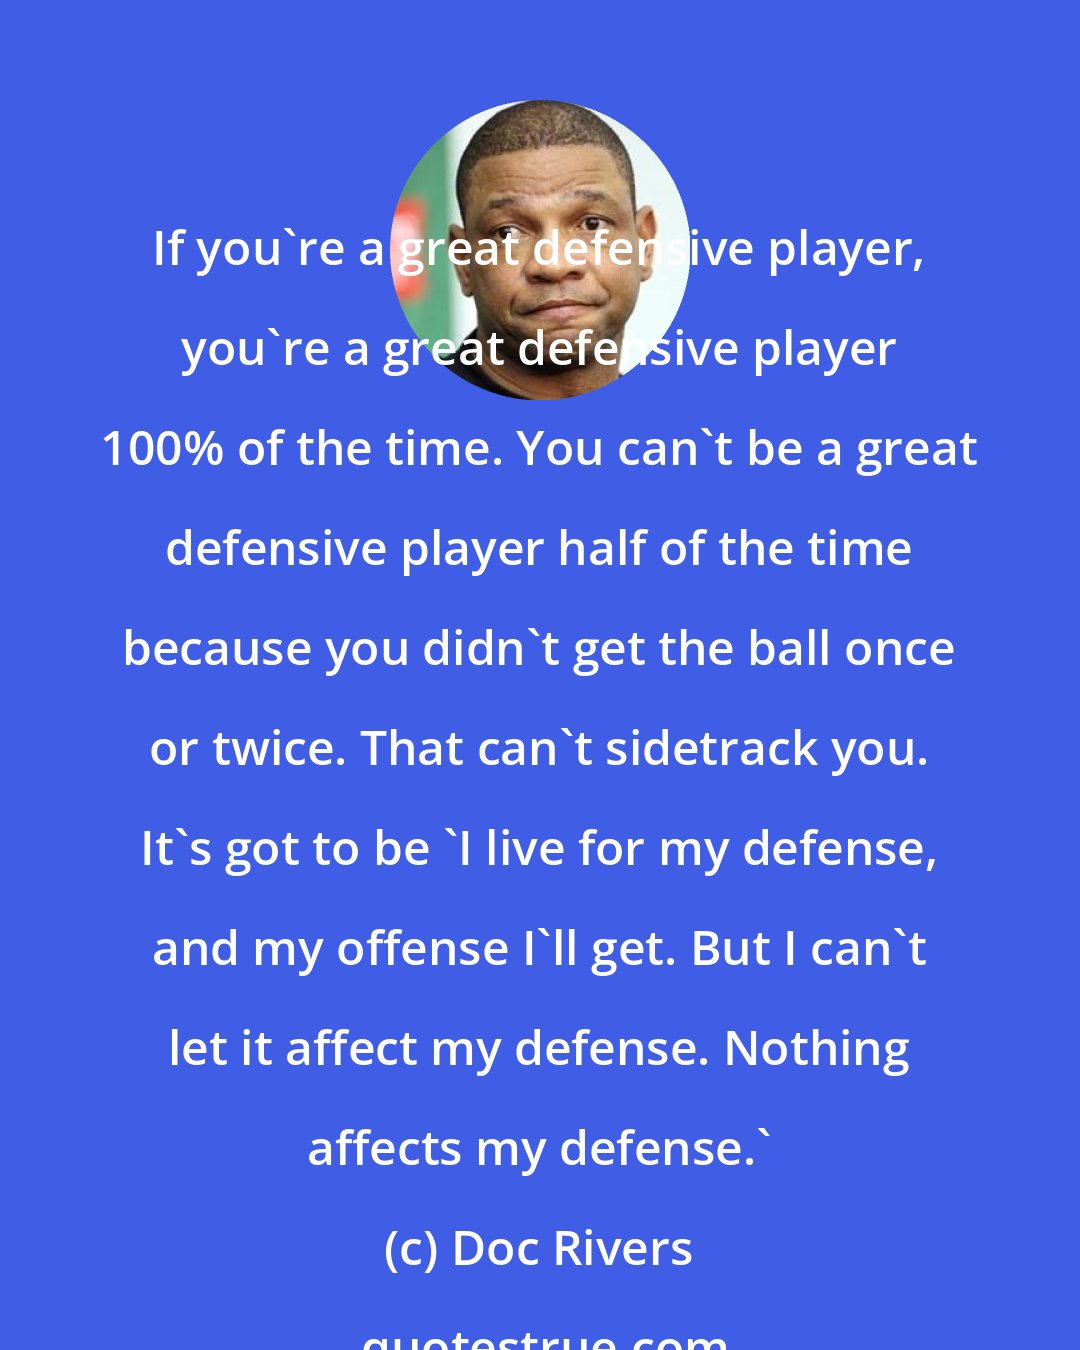 Doc Rivers: If you're a great defensive player, you're a great defensive player 100% of the time. You can't be a great defensive player half of the time because you didn't get the ball once or twice. That can't sidetrack you. It's got to be 'I live for my defense, and my offense I'll get. But I can't let it affect my defense. Nothing affects my defense.'